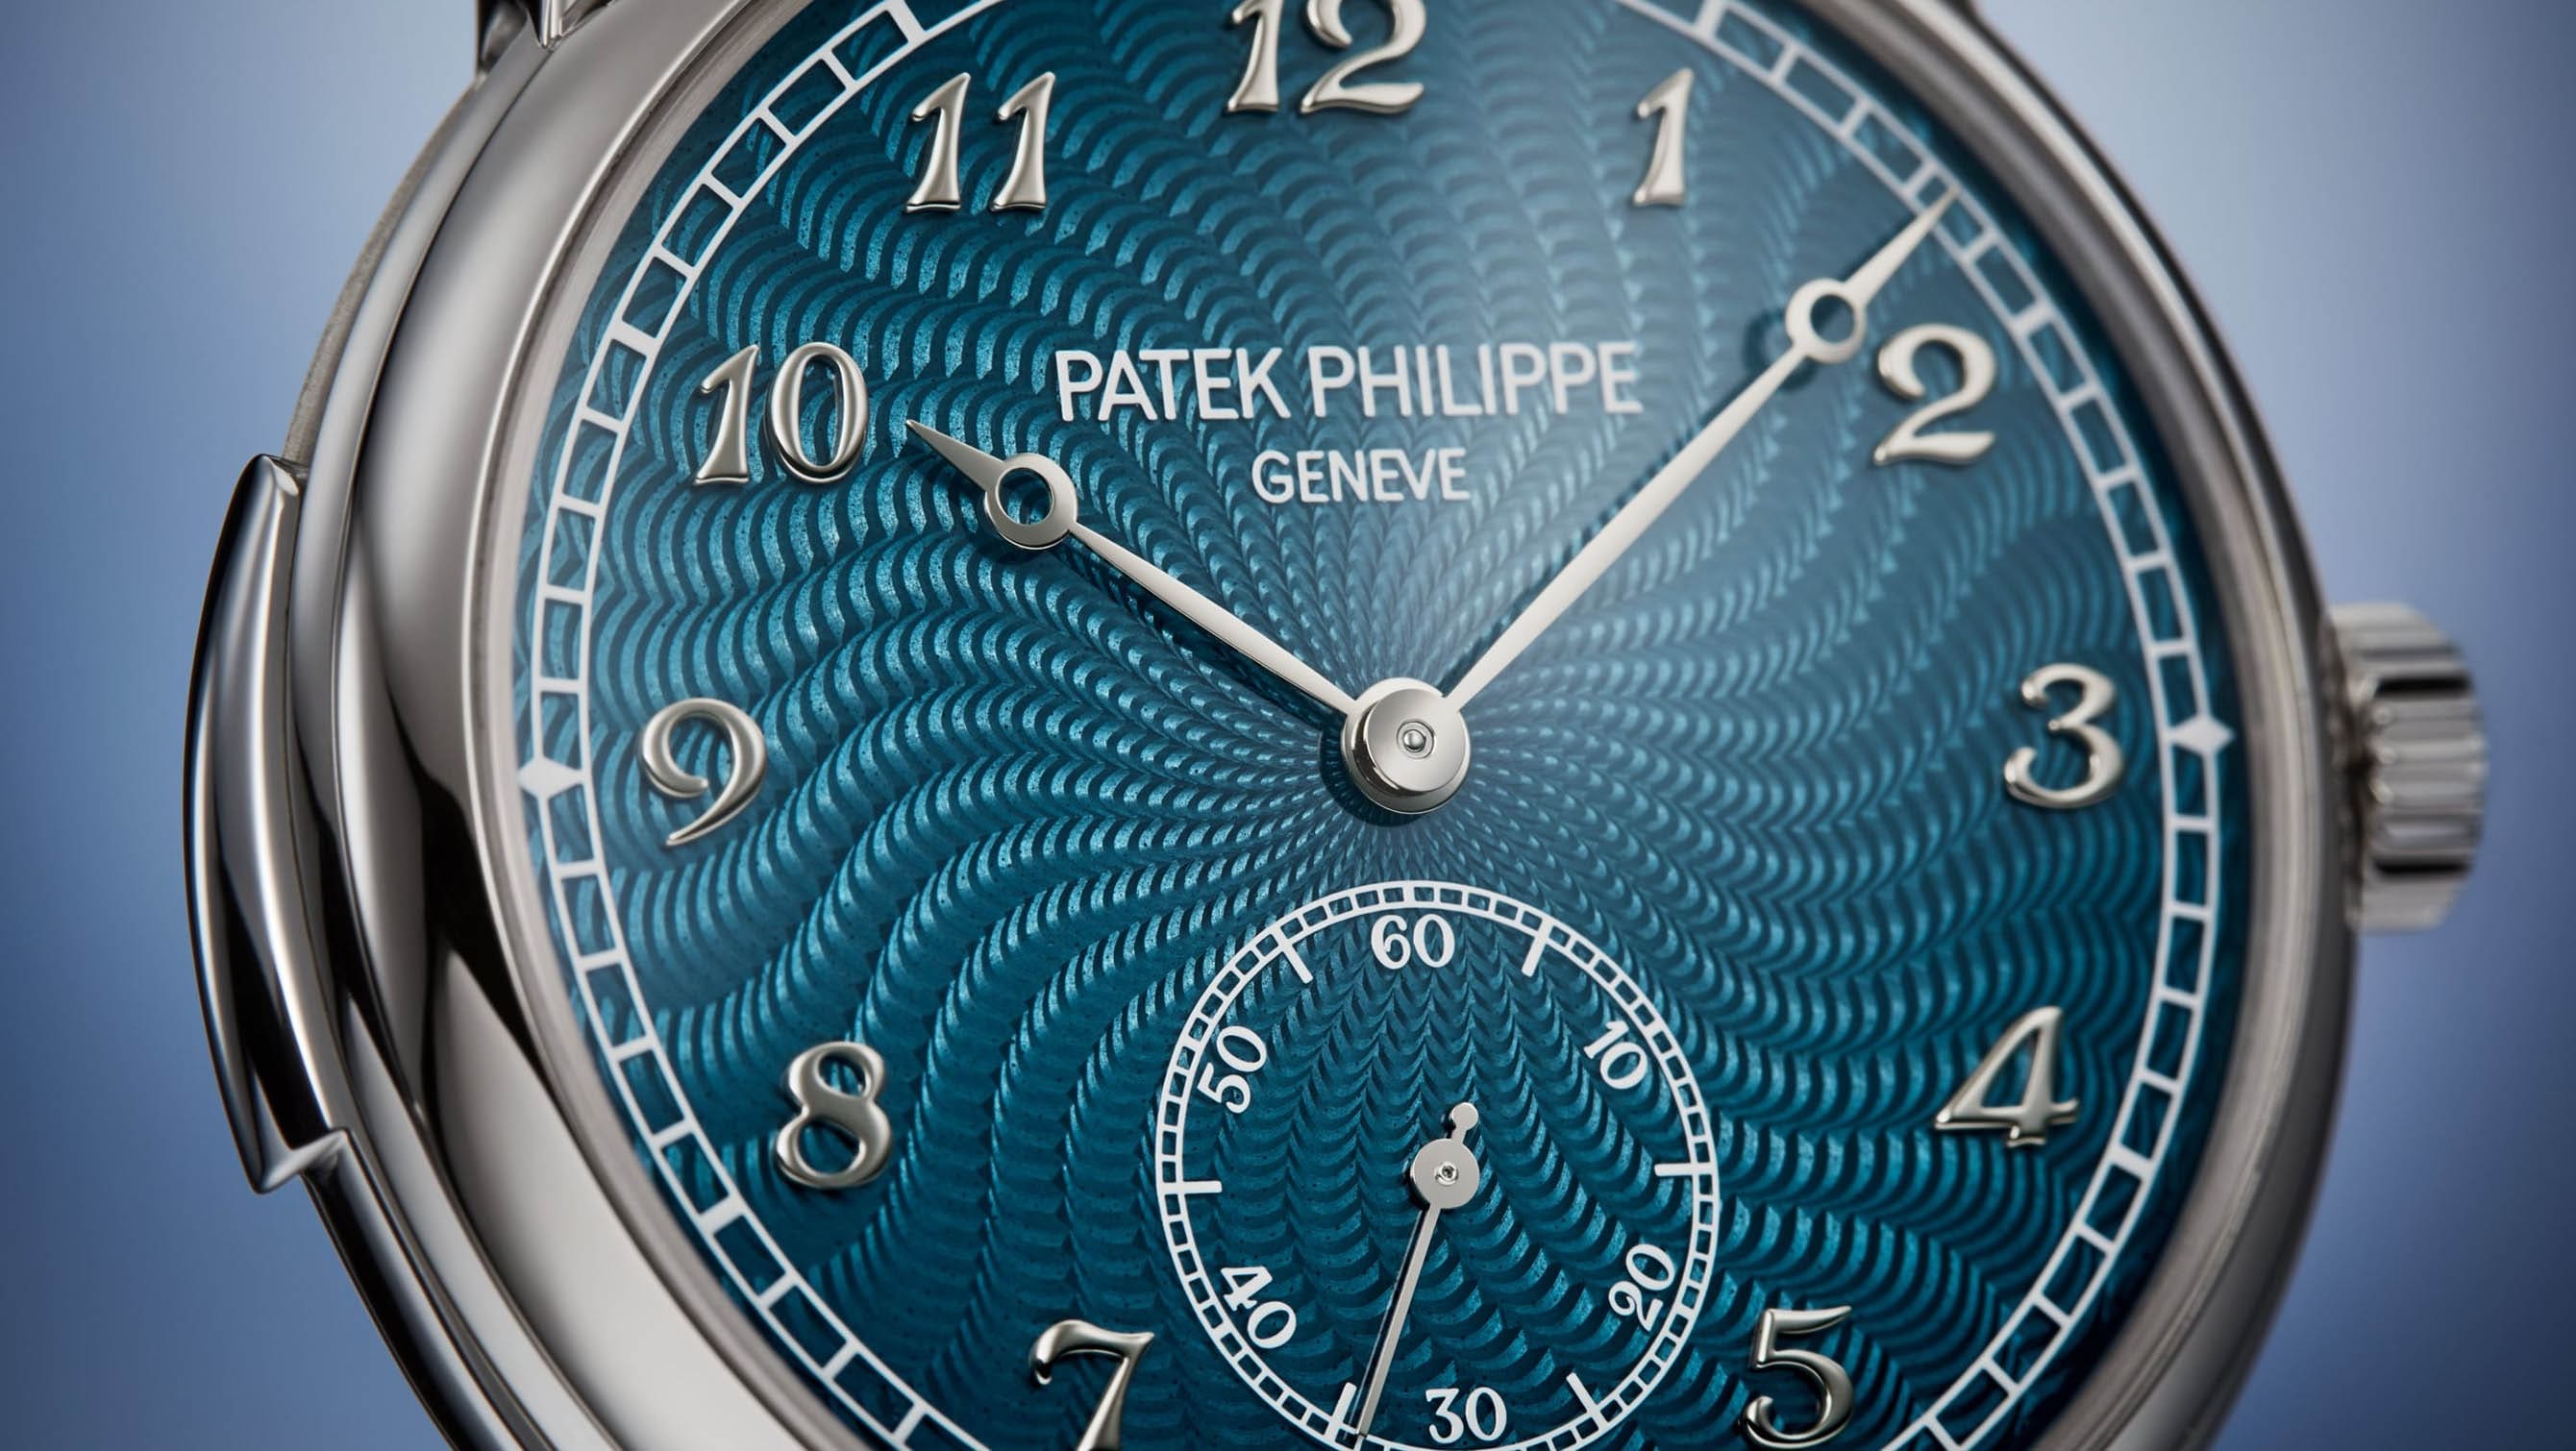 The Patek Philippe 5178G-012 is a minute repeater with a stunning flinqué enamel dial